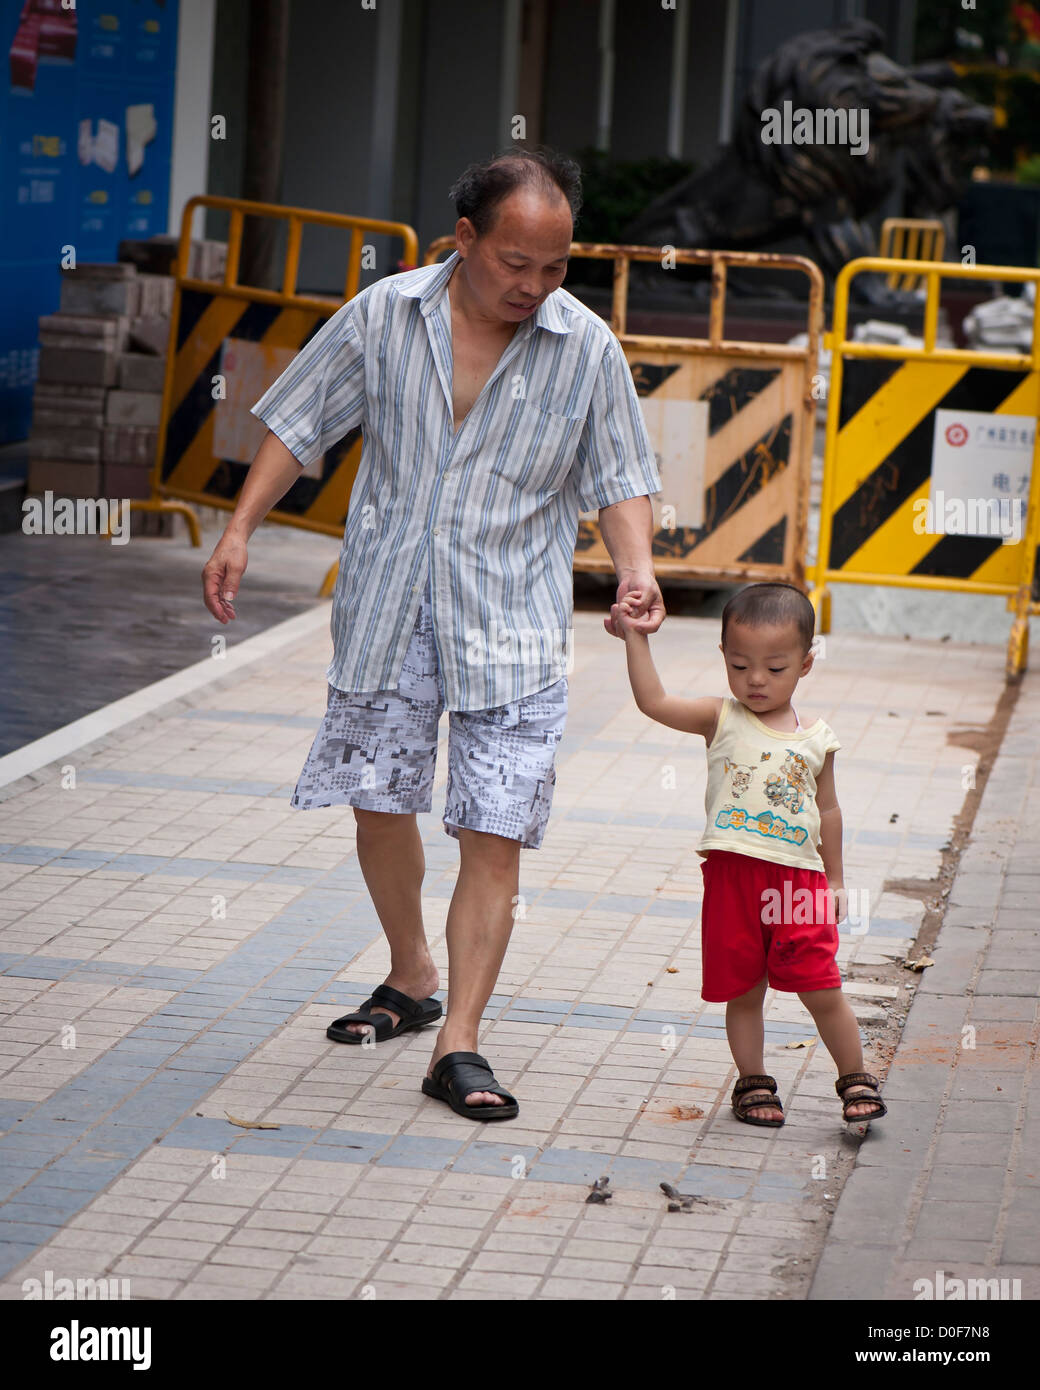 Grandfather warns his grandson to watch out for the dog poo, Guangzhou Stock Photo